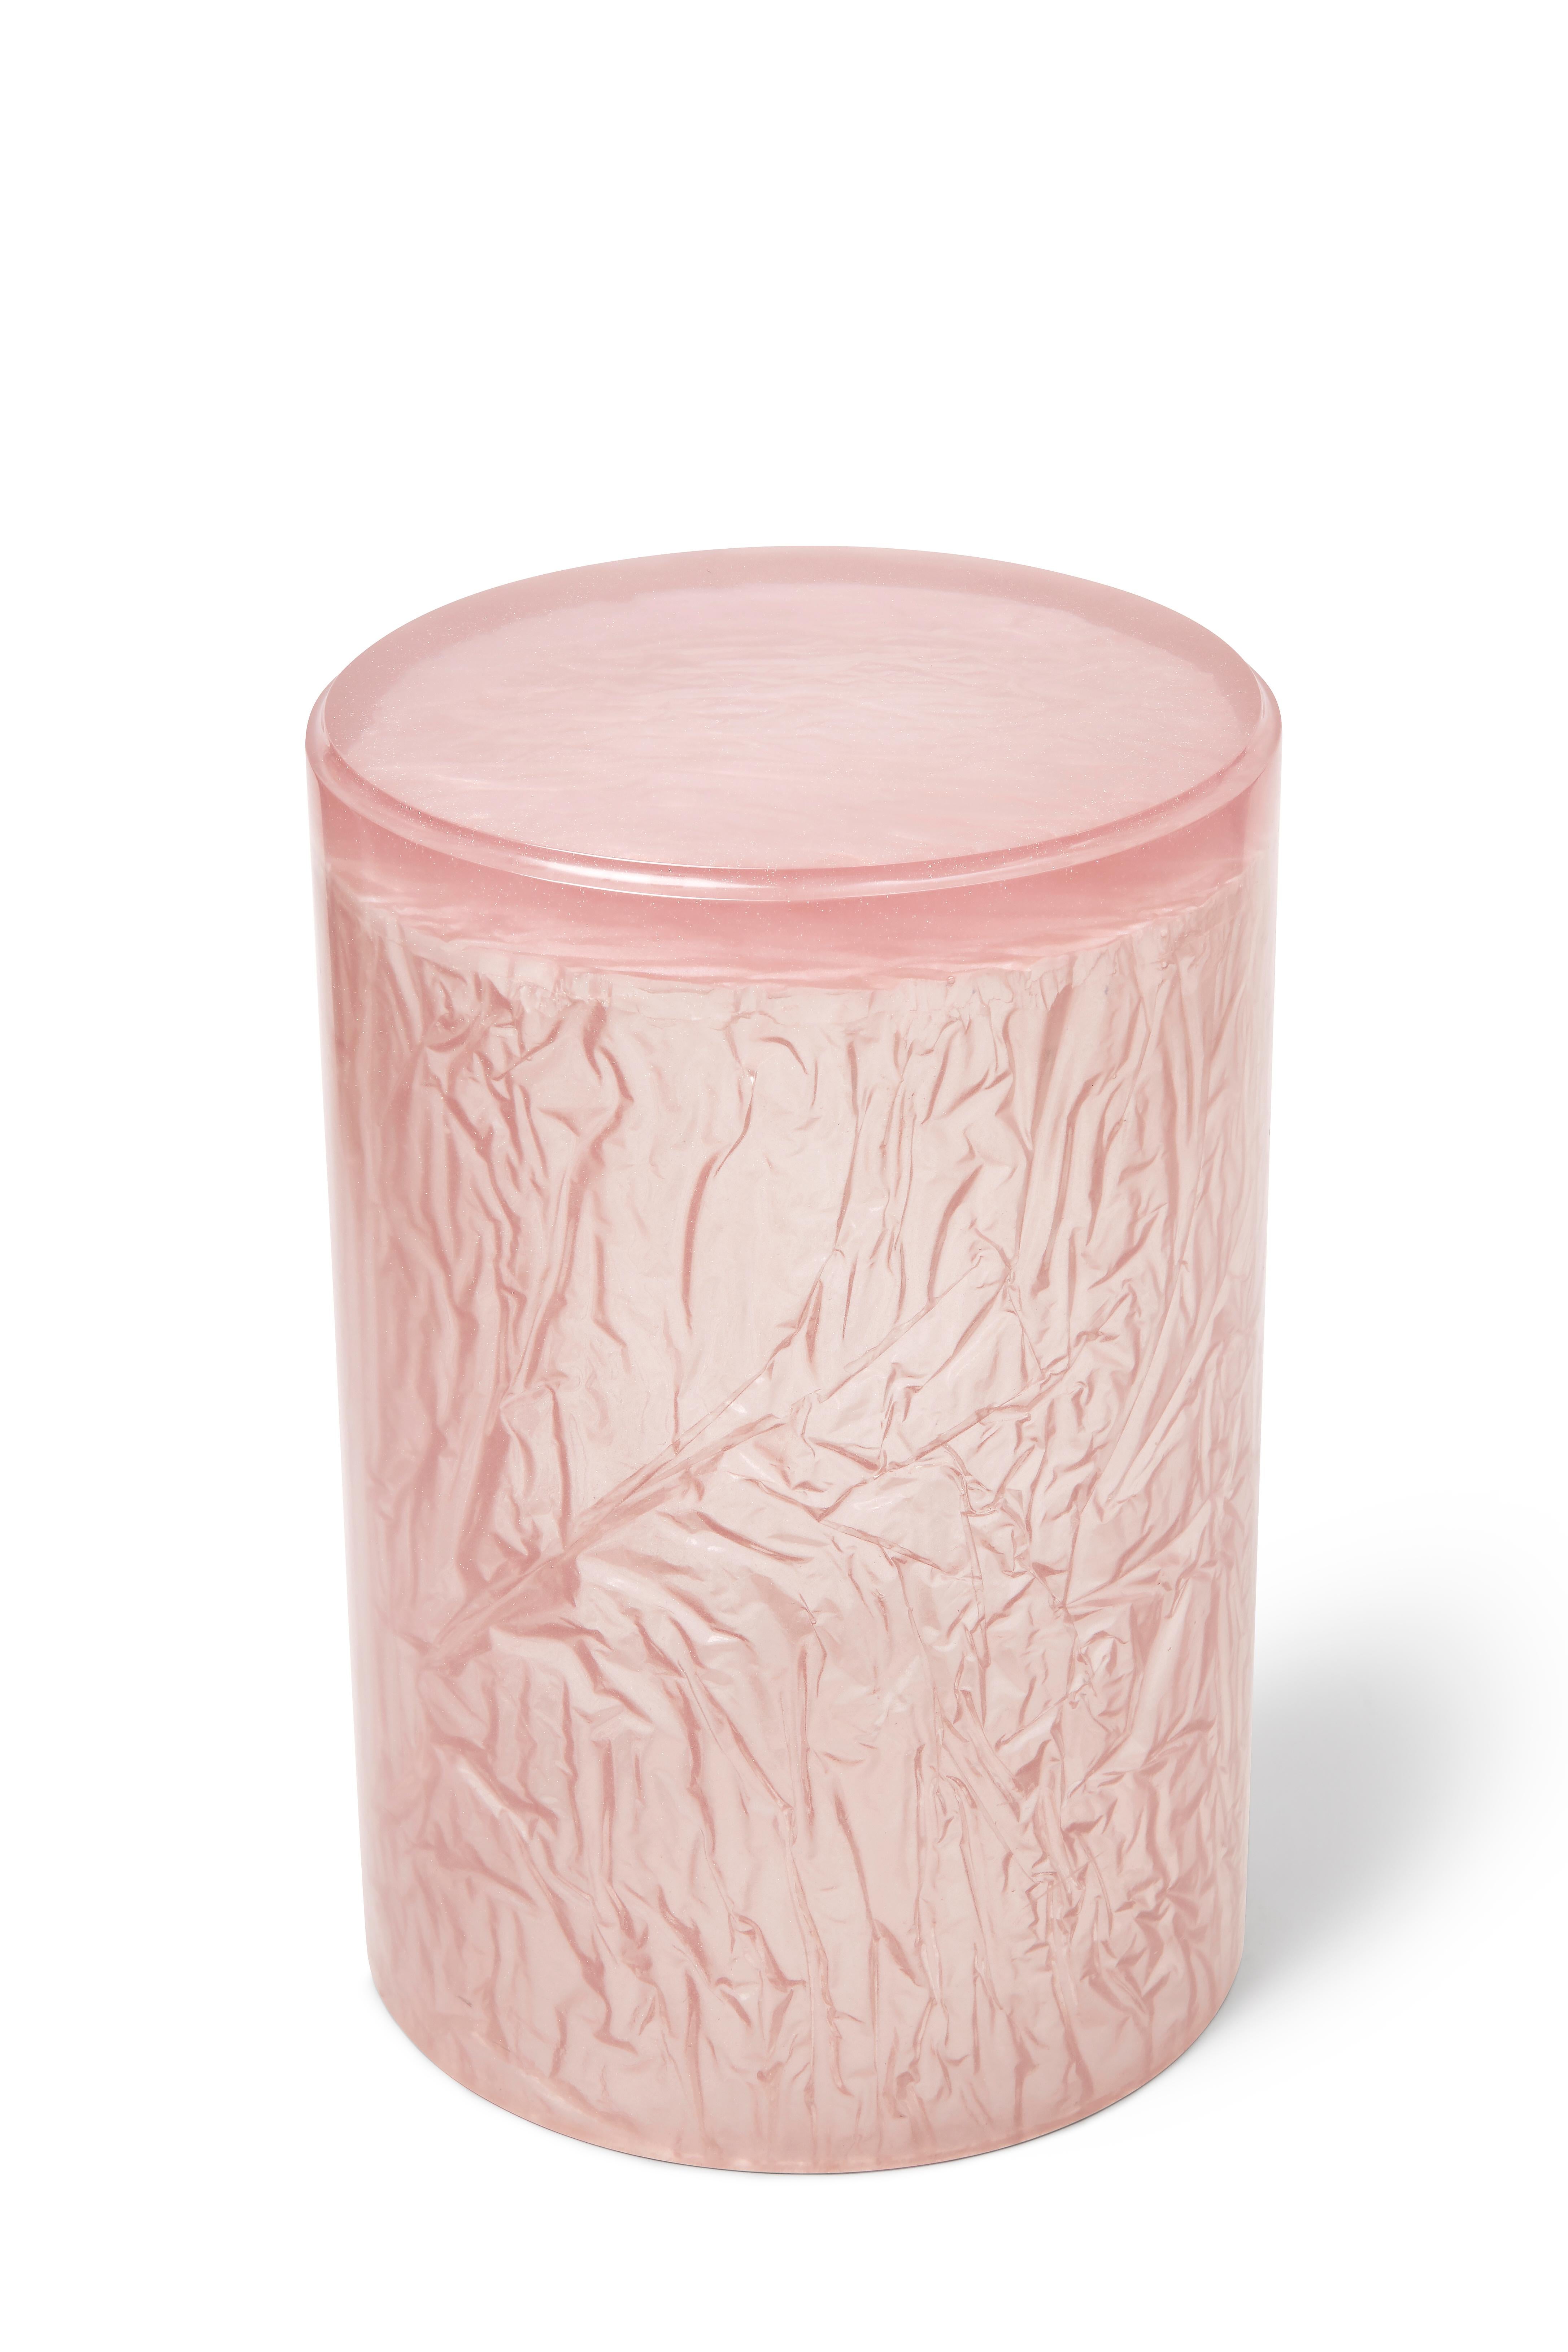 Cast Contemporary Resin Acrylic Side Table or Stool by Natalie Tredgett, gloss, Pink For Sale